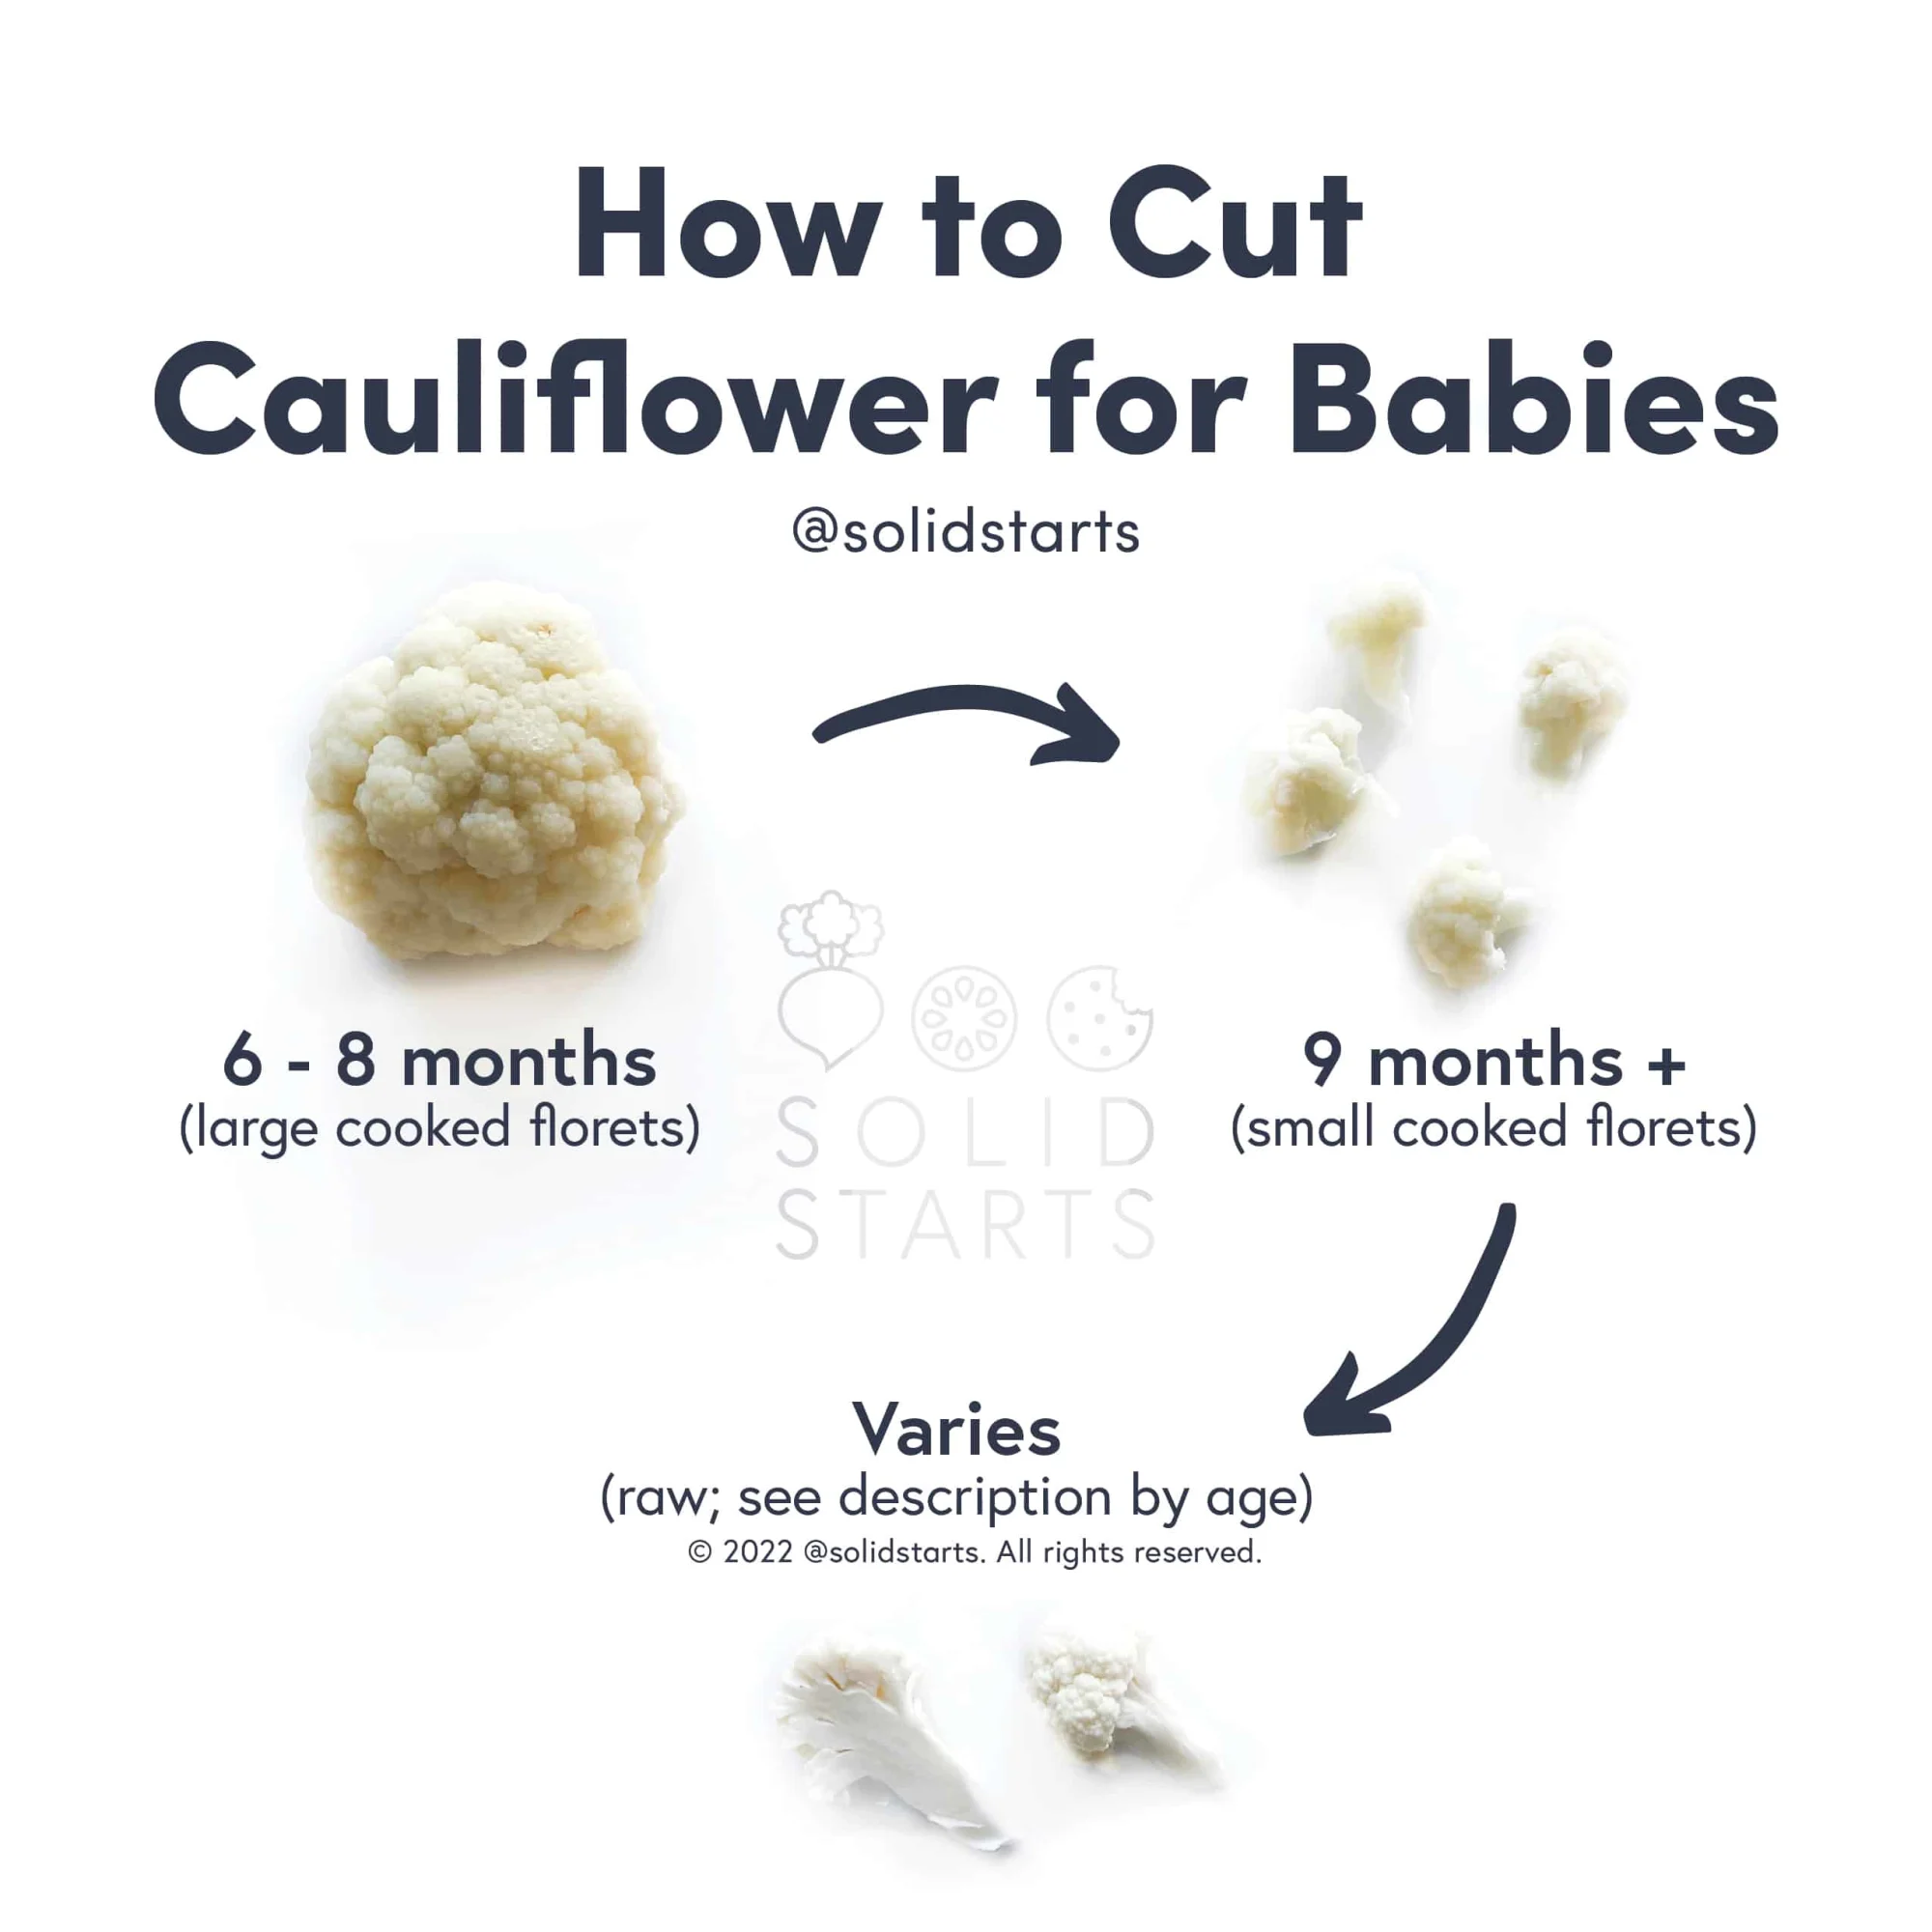 a Solid Starts infographic with the header How to Cut Cauliflower for Babies: large, cooked florets for 6 months+, small cooked florets for 9 months+, and raw florets (age varies)